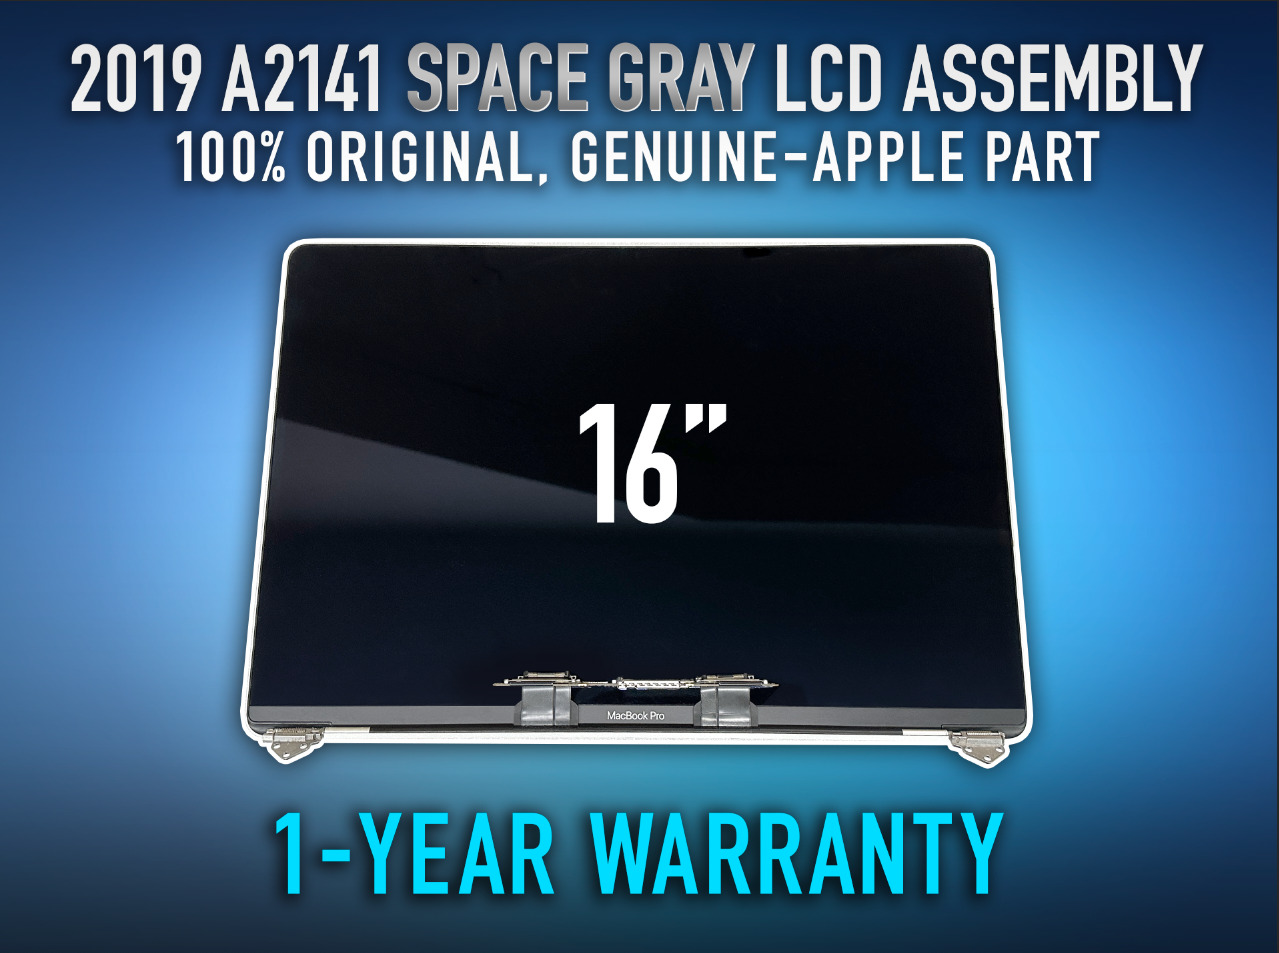 GENUINE APPLE 2019 A2141 Space Gray LCD Display Assembly MacBook Pro 16 1Yr Warr